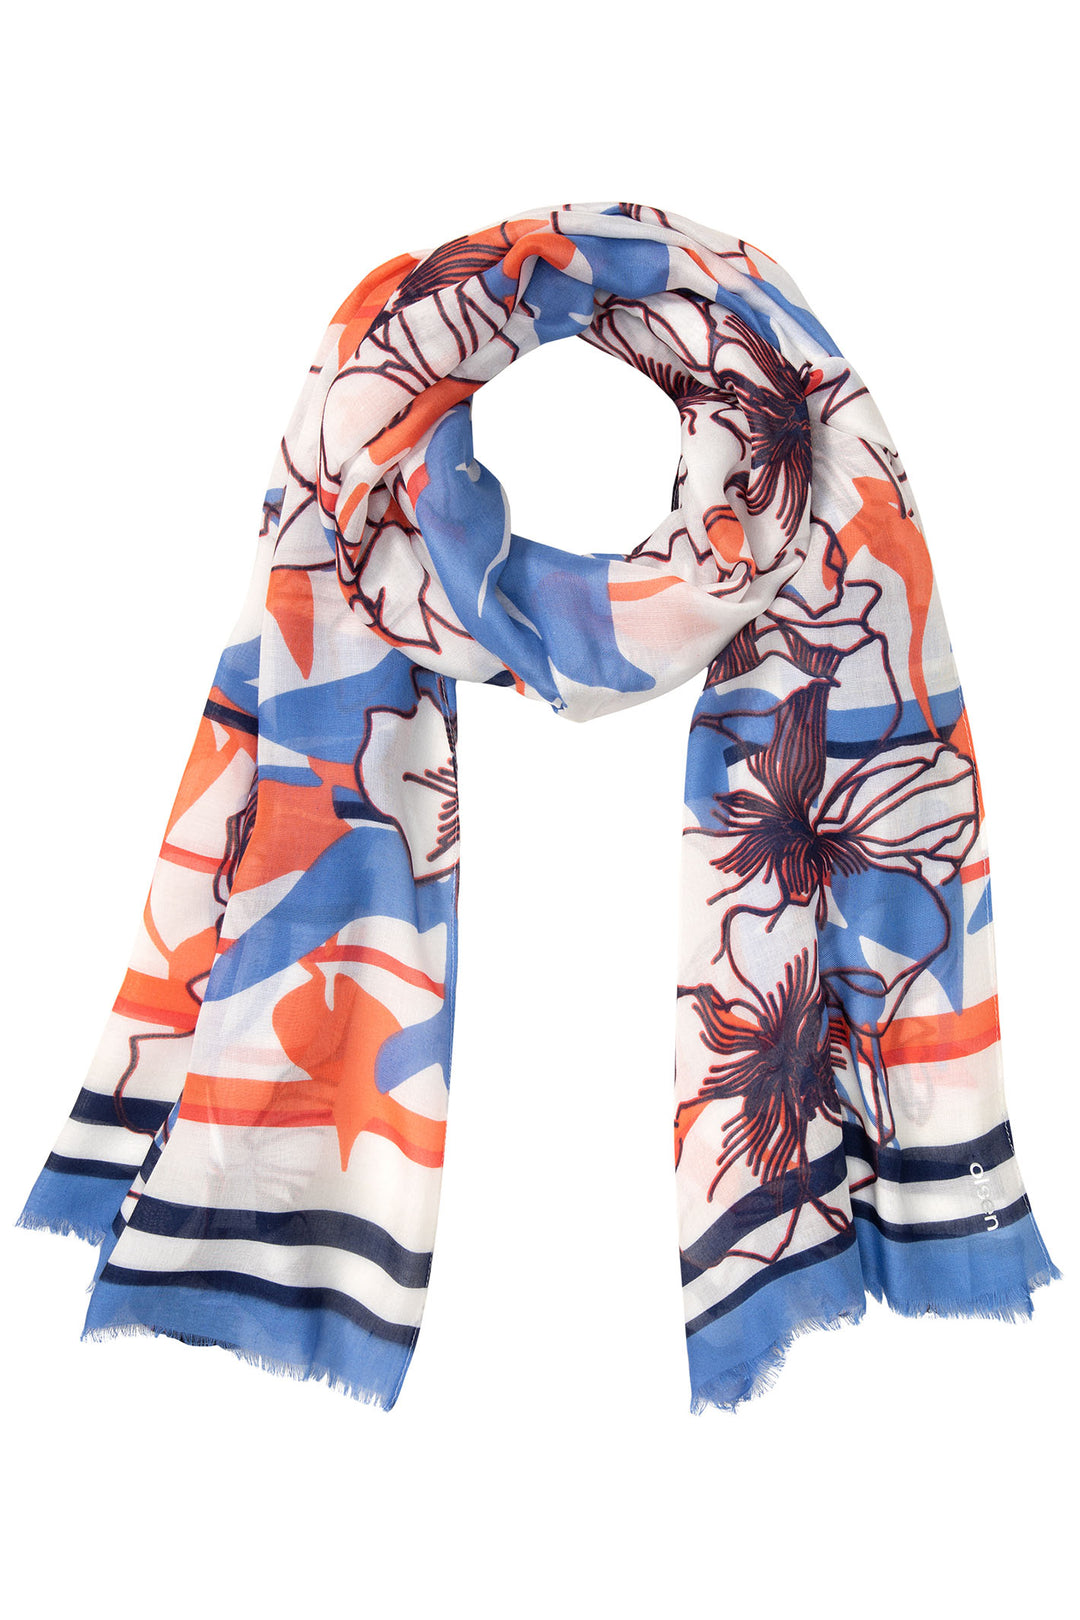 Olsen 18001896 Apricot Crush Floral Print Scarf - Experience Boutique